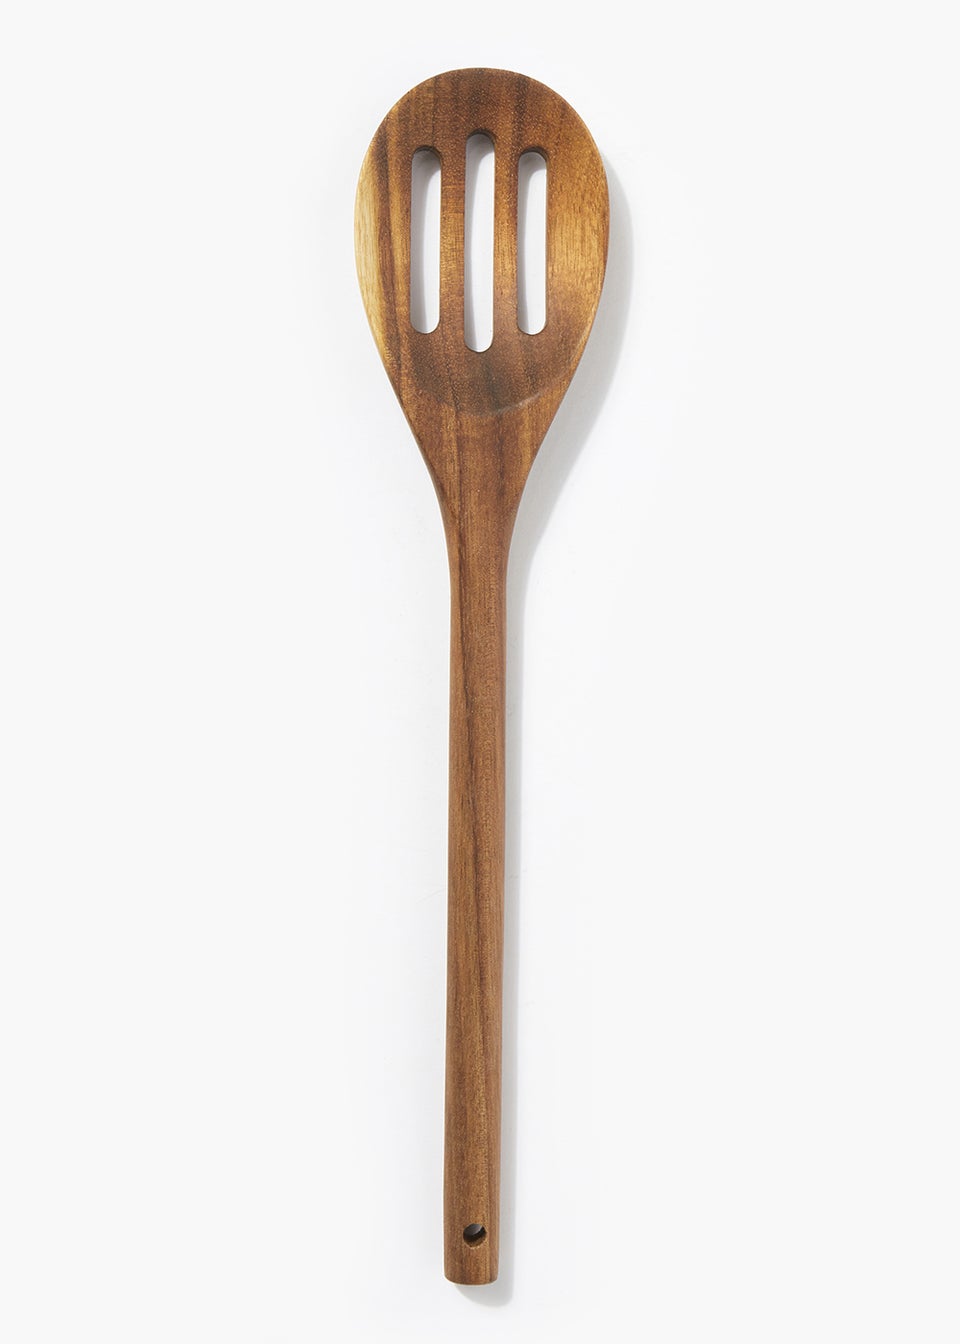 Wooden Slotted Spoon (30cm x 6.5cm)